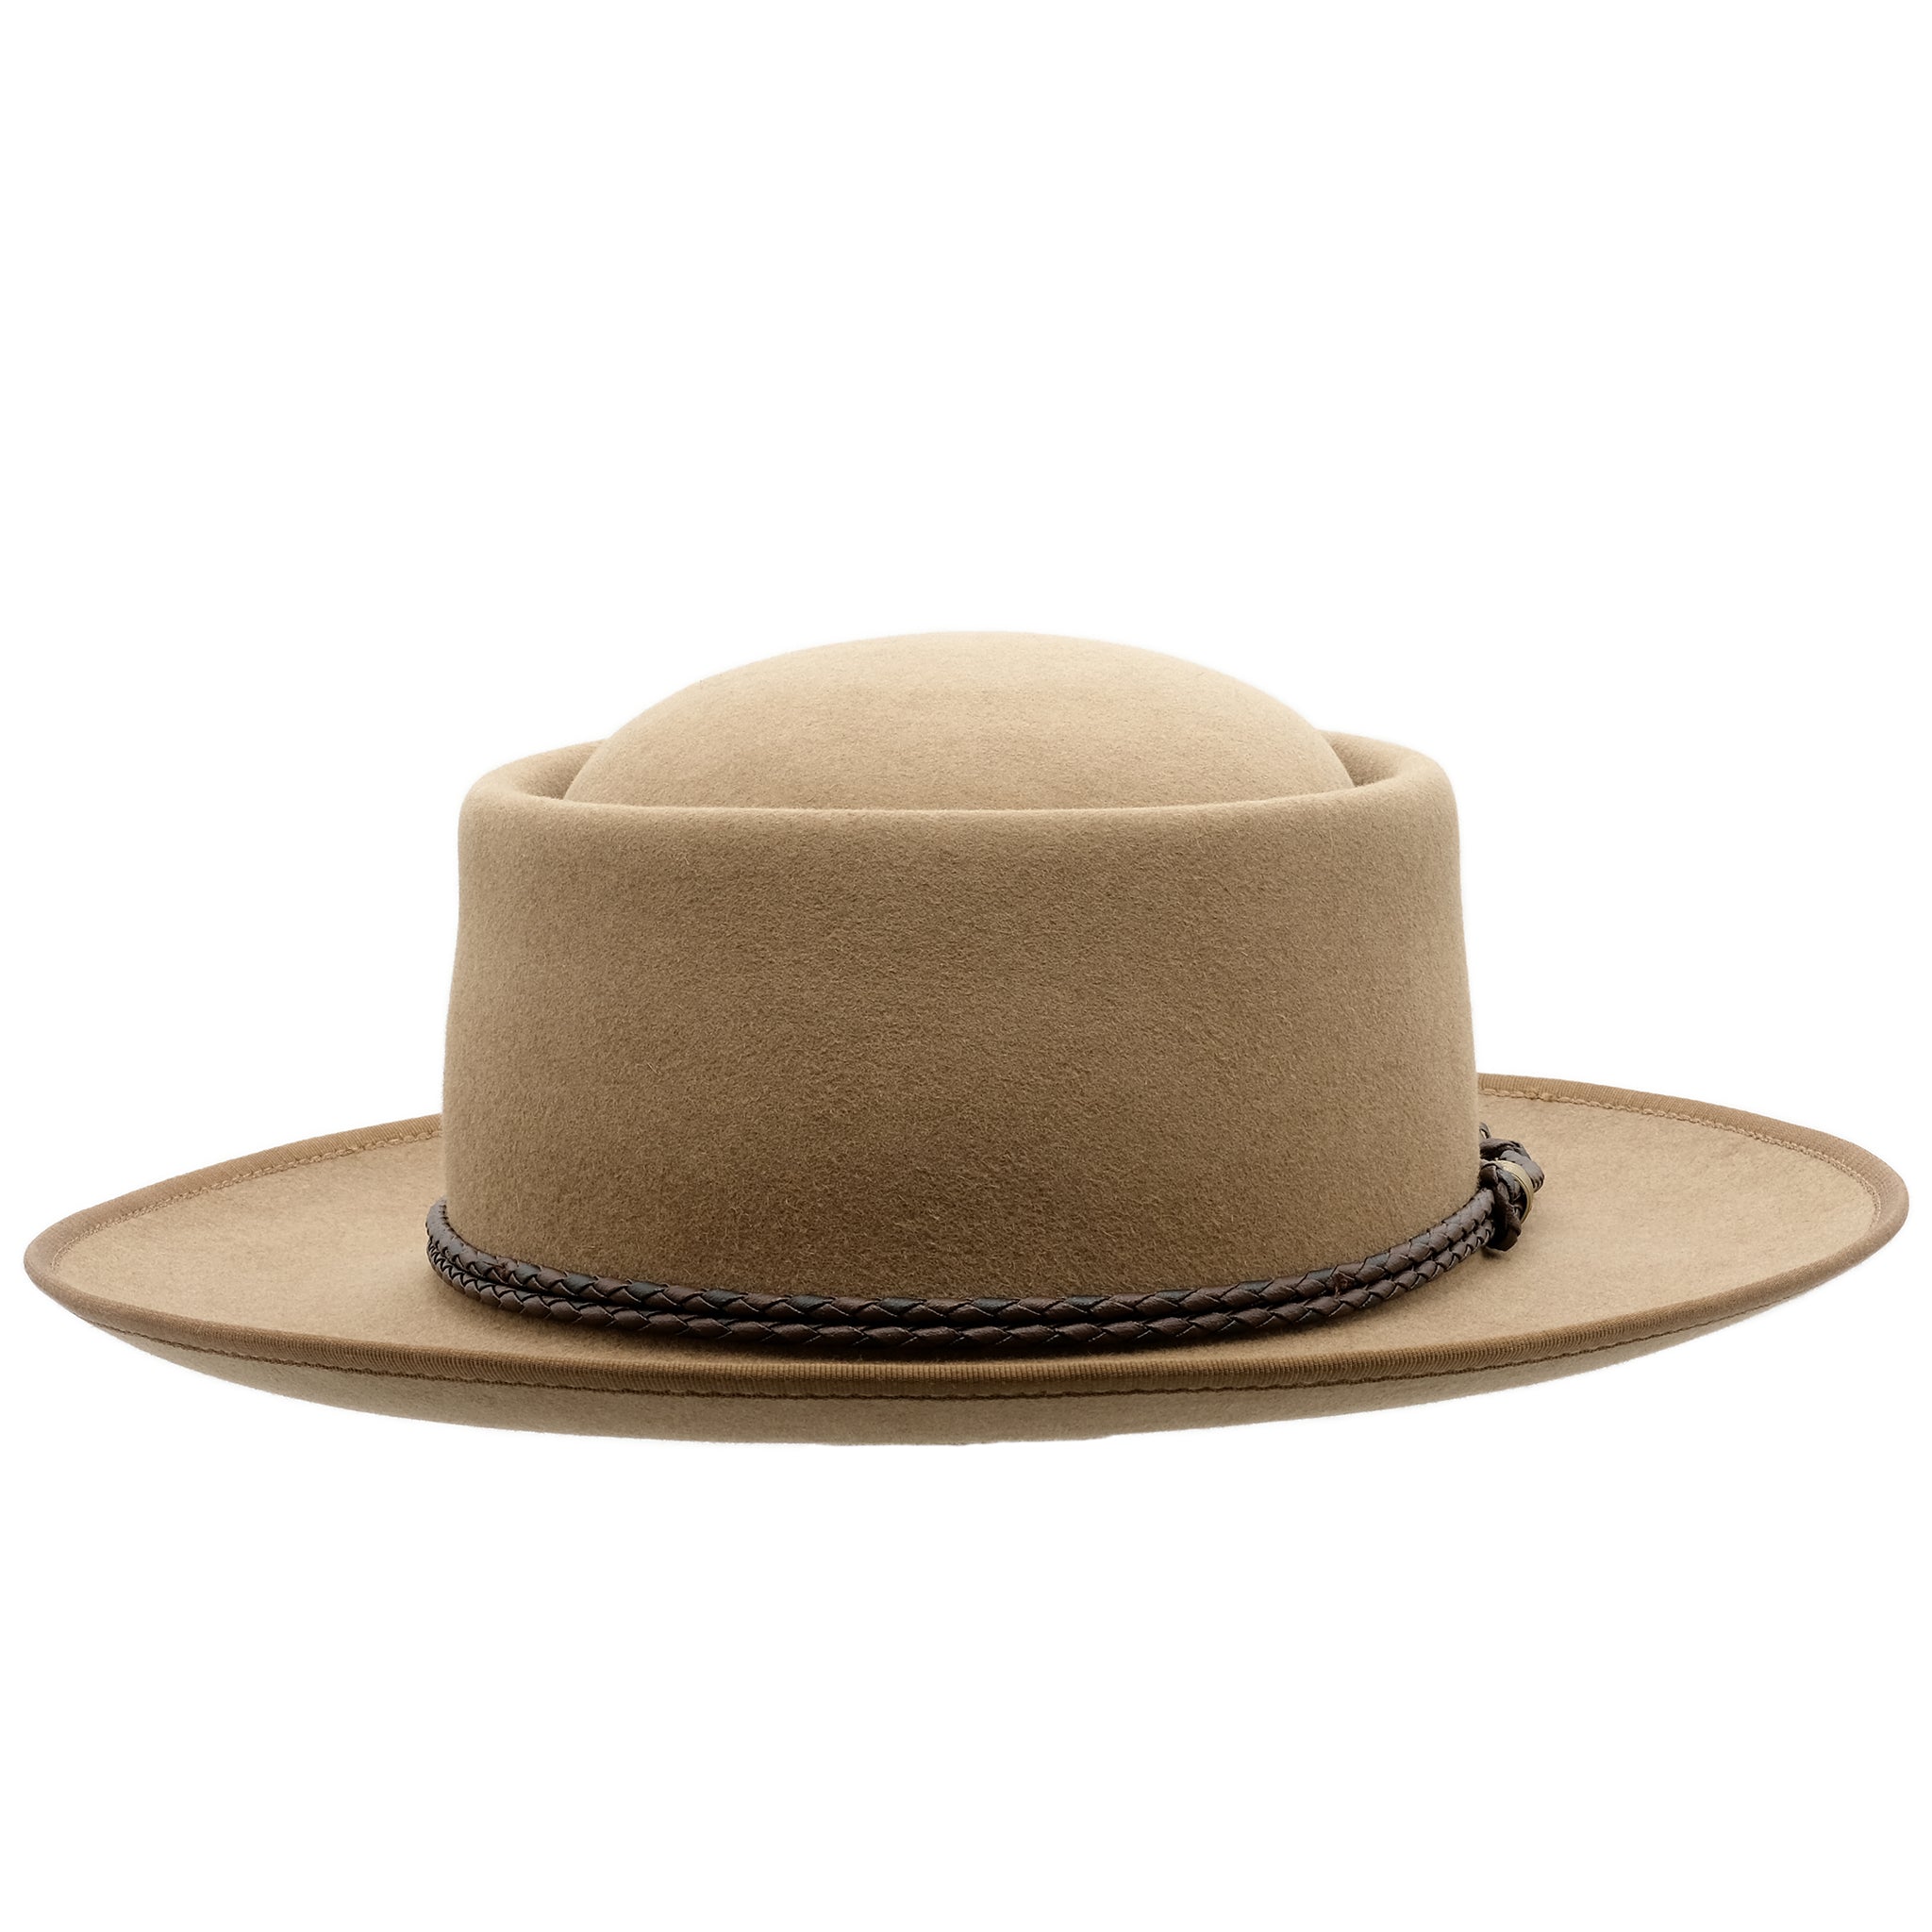 Front view of the Akubra Pastoralist hat in Tawny Fawn colour